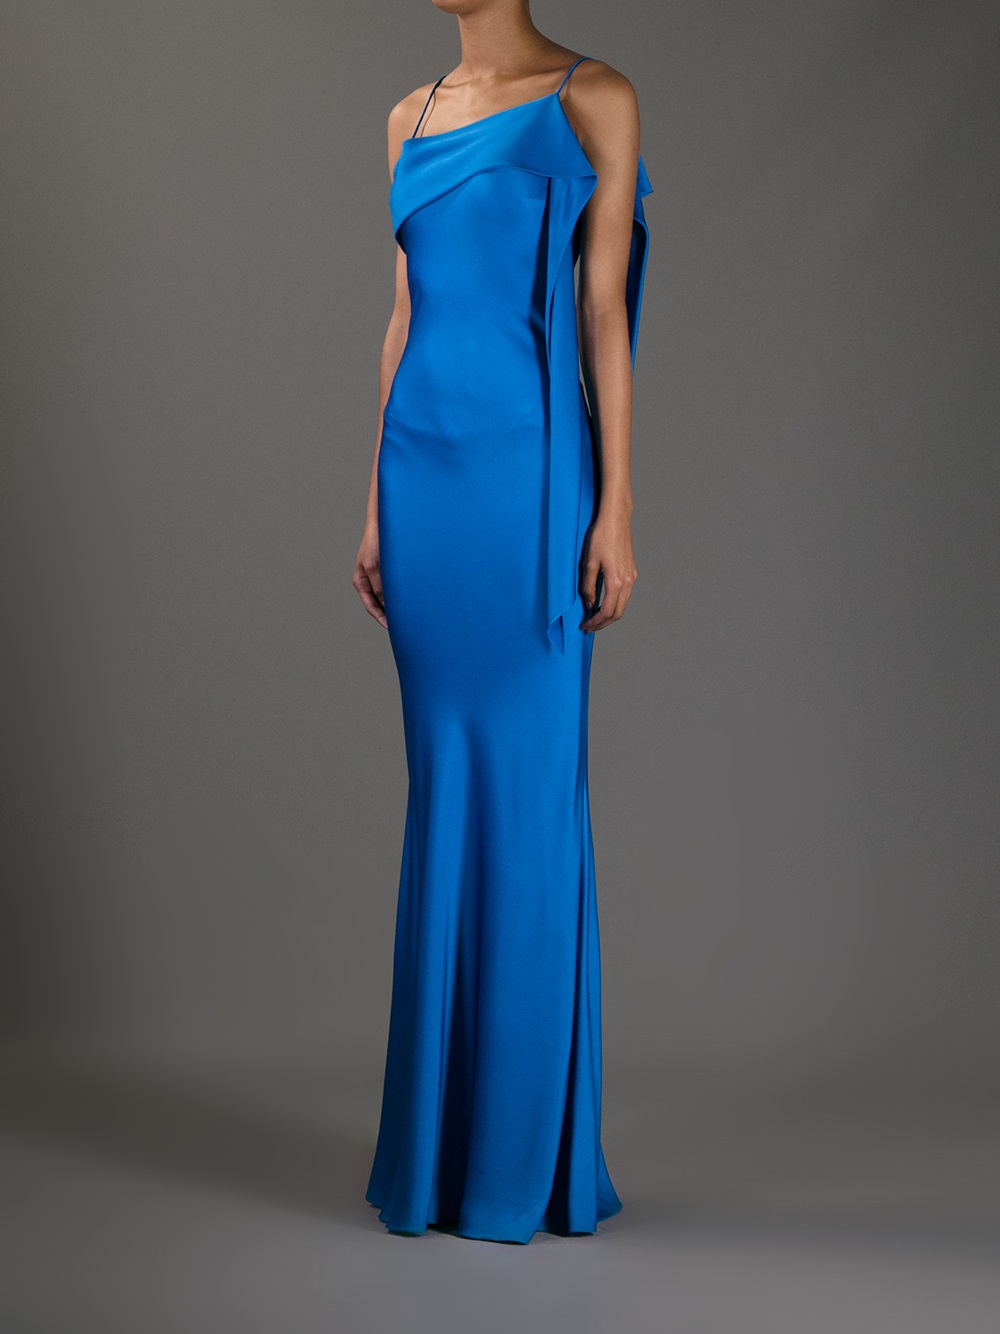 Lyst - John Galliano Evening Gown in Blue